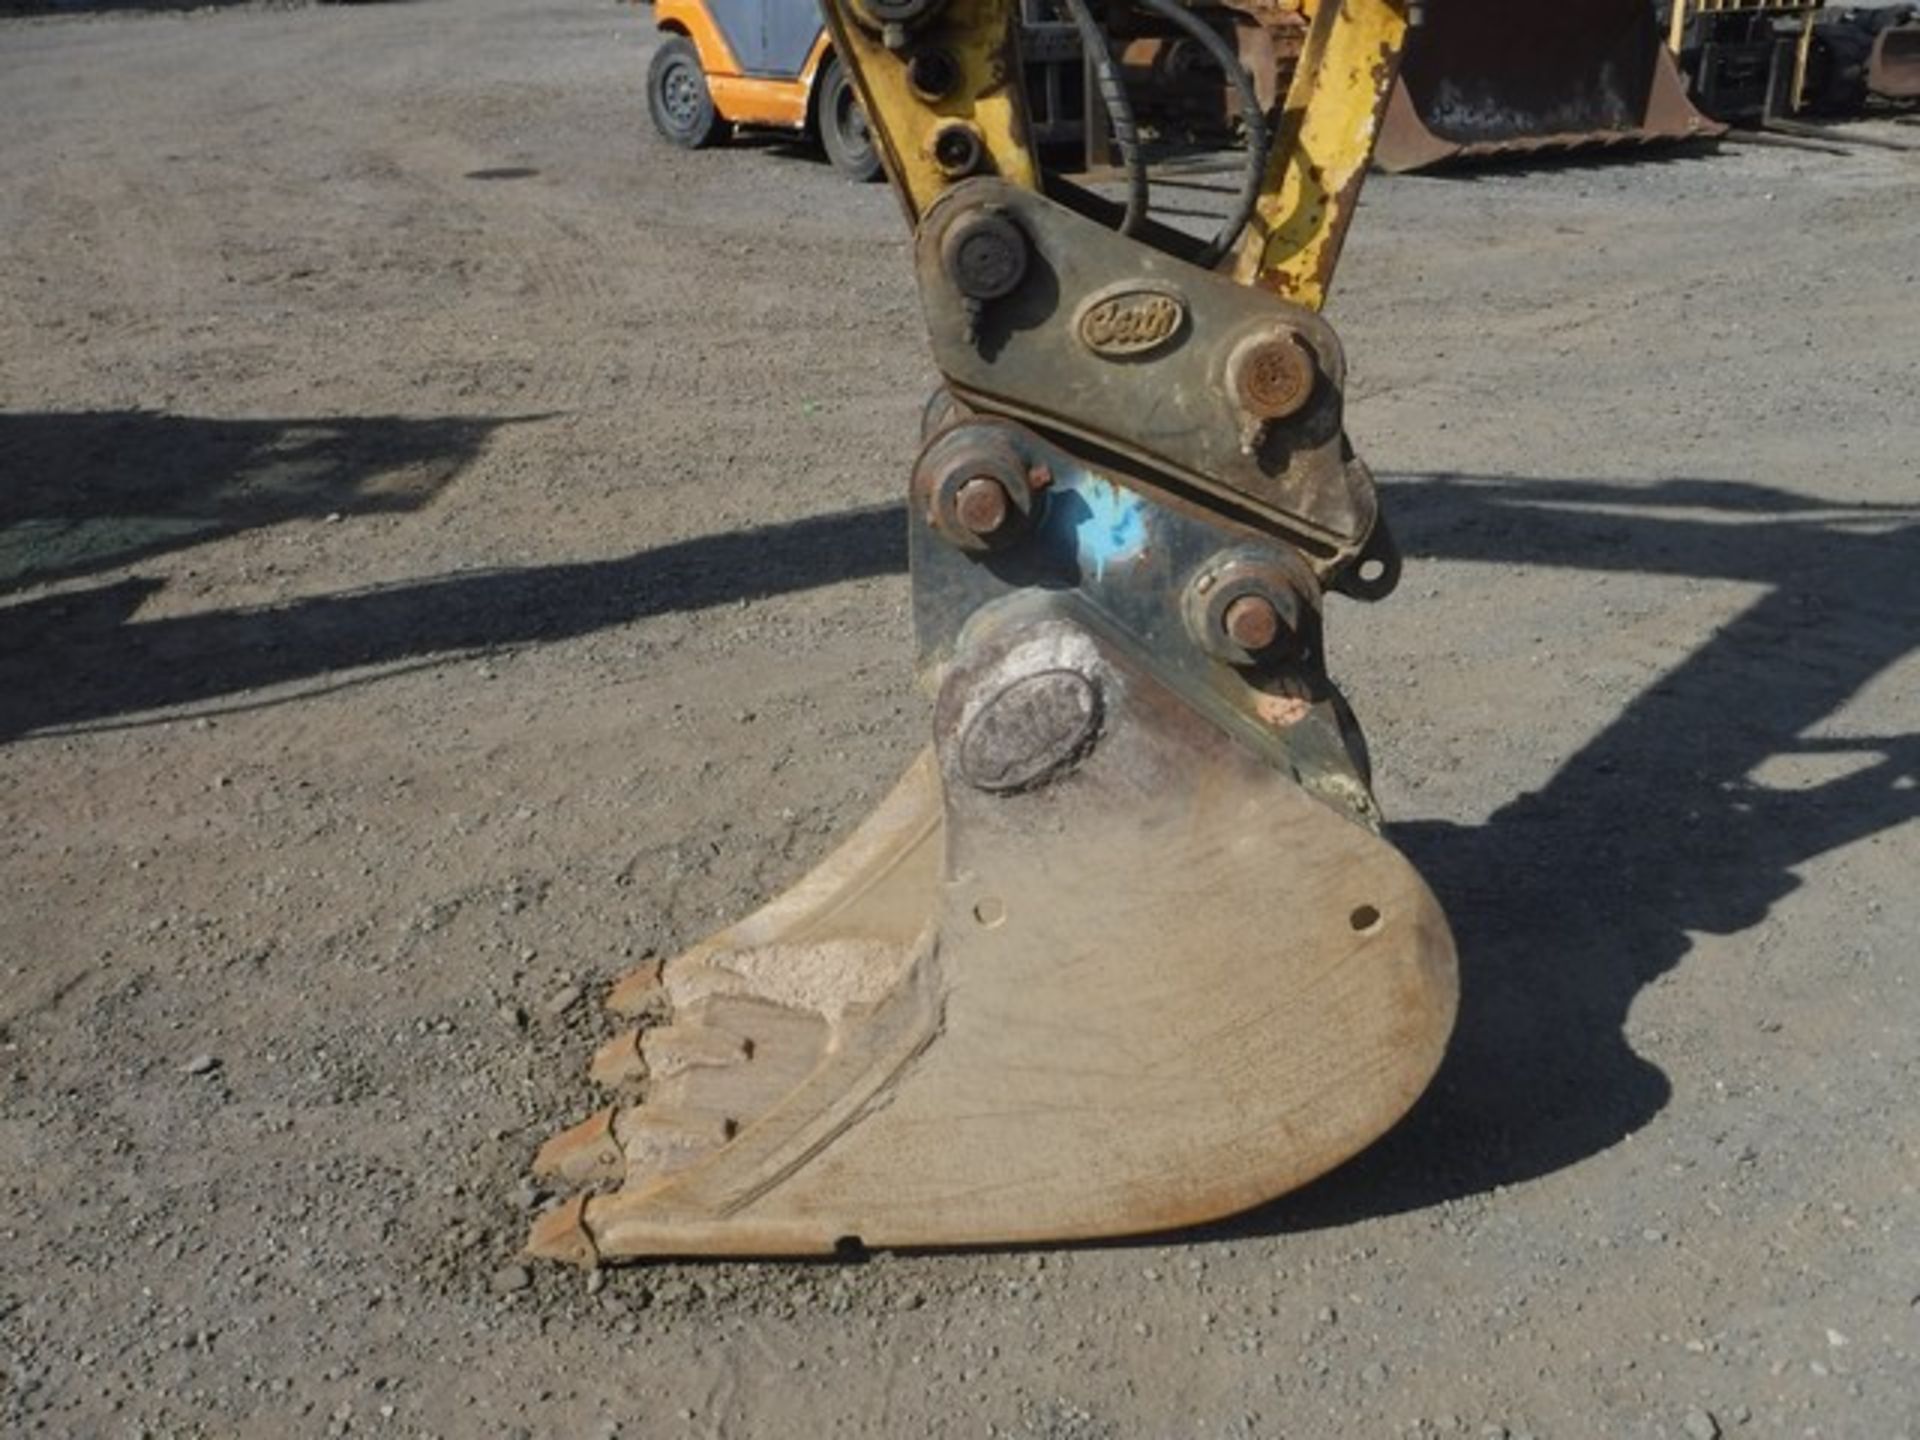 NEW HOLLAND 2008 10T WHEELED EXCAVATOR 12669HRS (NOT VERIFIED) C/W BLADE, HPW, HYDRAULIC QUICK HITC - Image 3 of 8